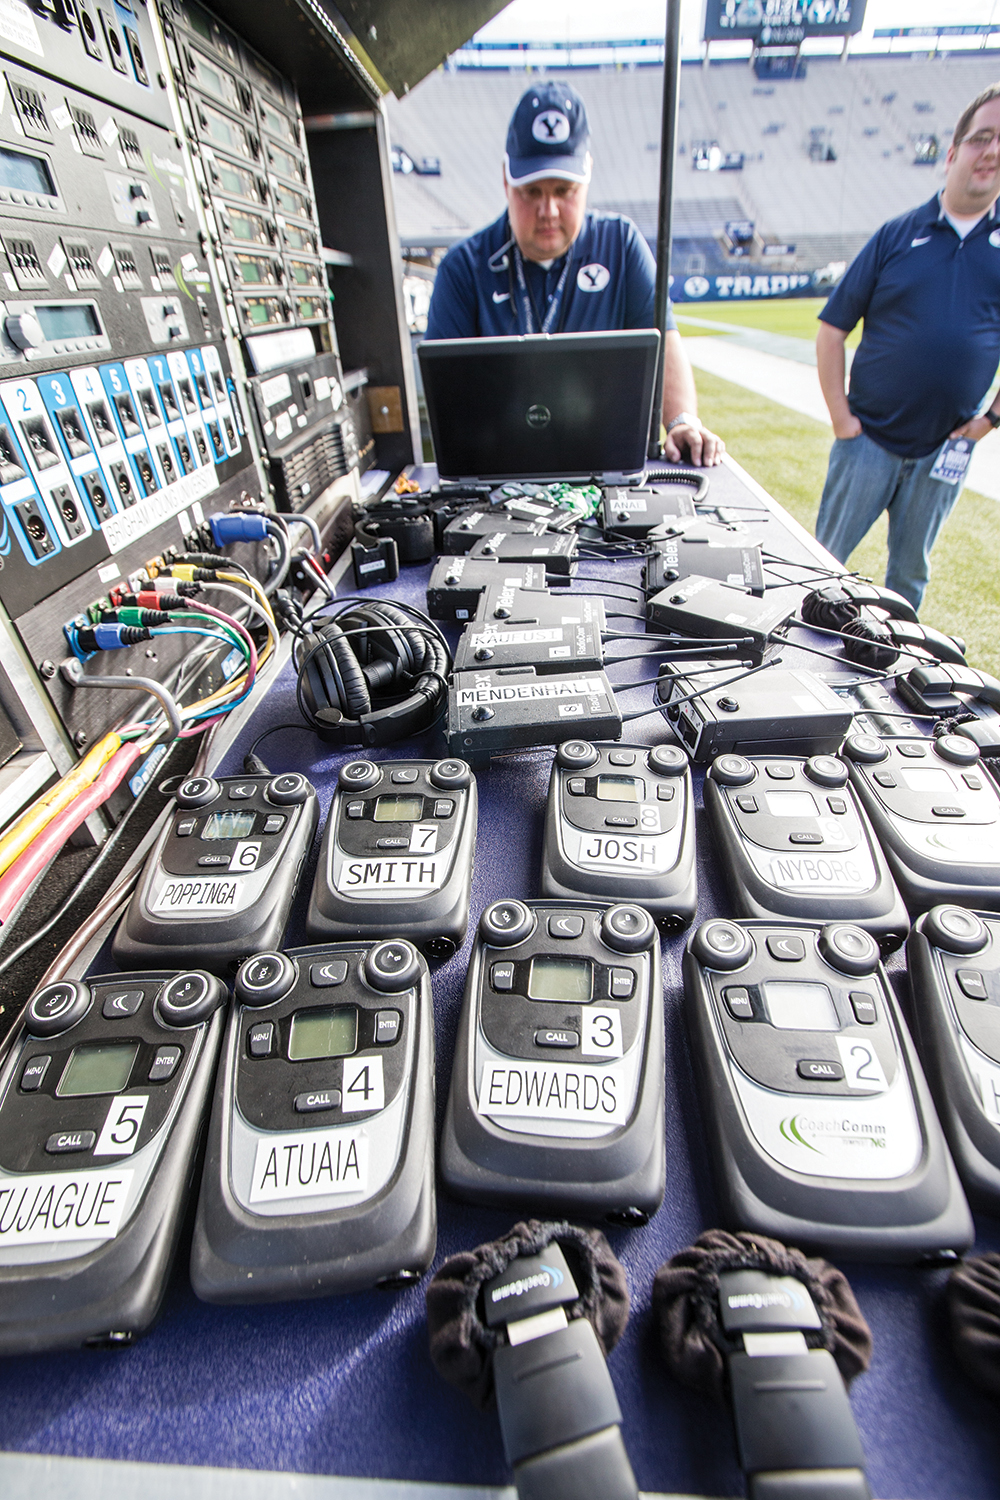 BYU's headset coordinator examines the coaches' radios before a football game kickoff.